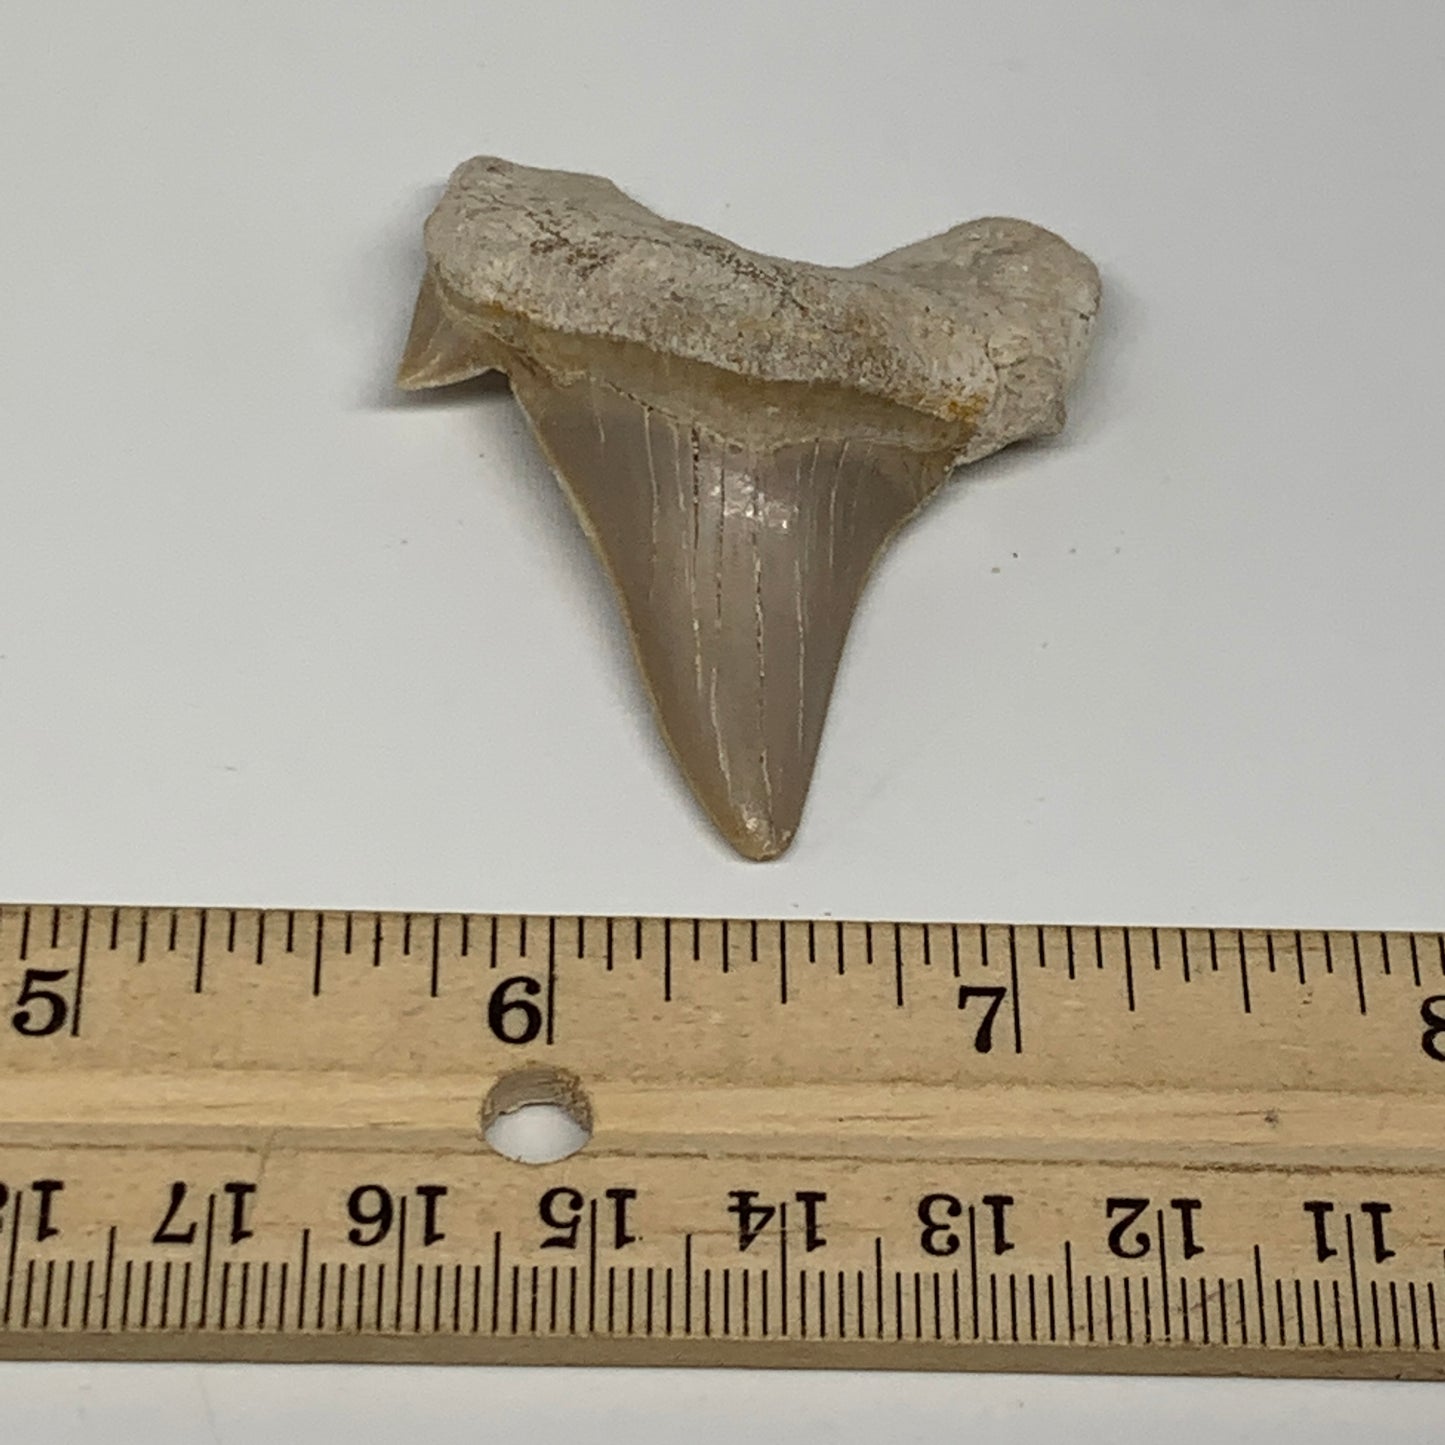 17.5g, 2"X 1.6"x 0.6" Natural Fossils Fish Shark Tooth @Morocco, B12696